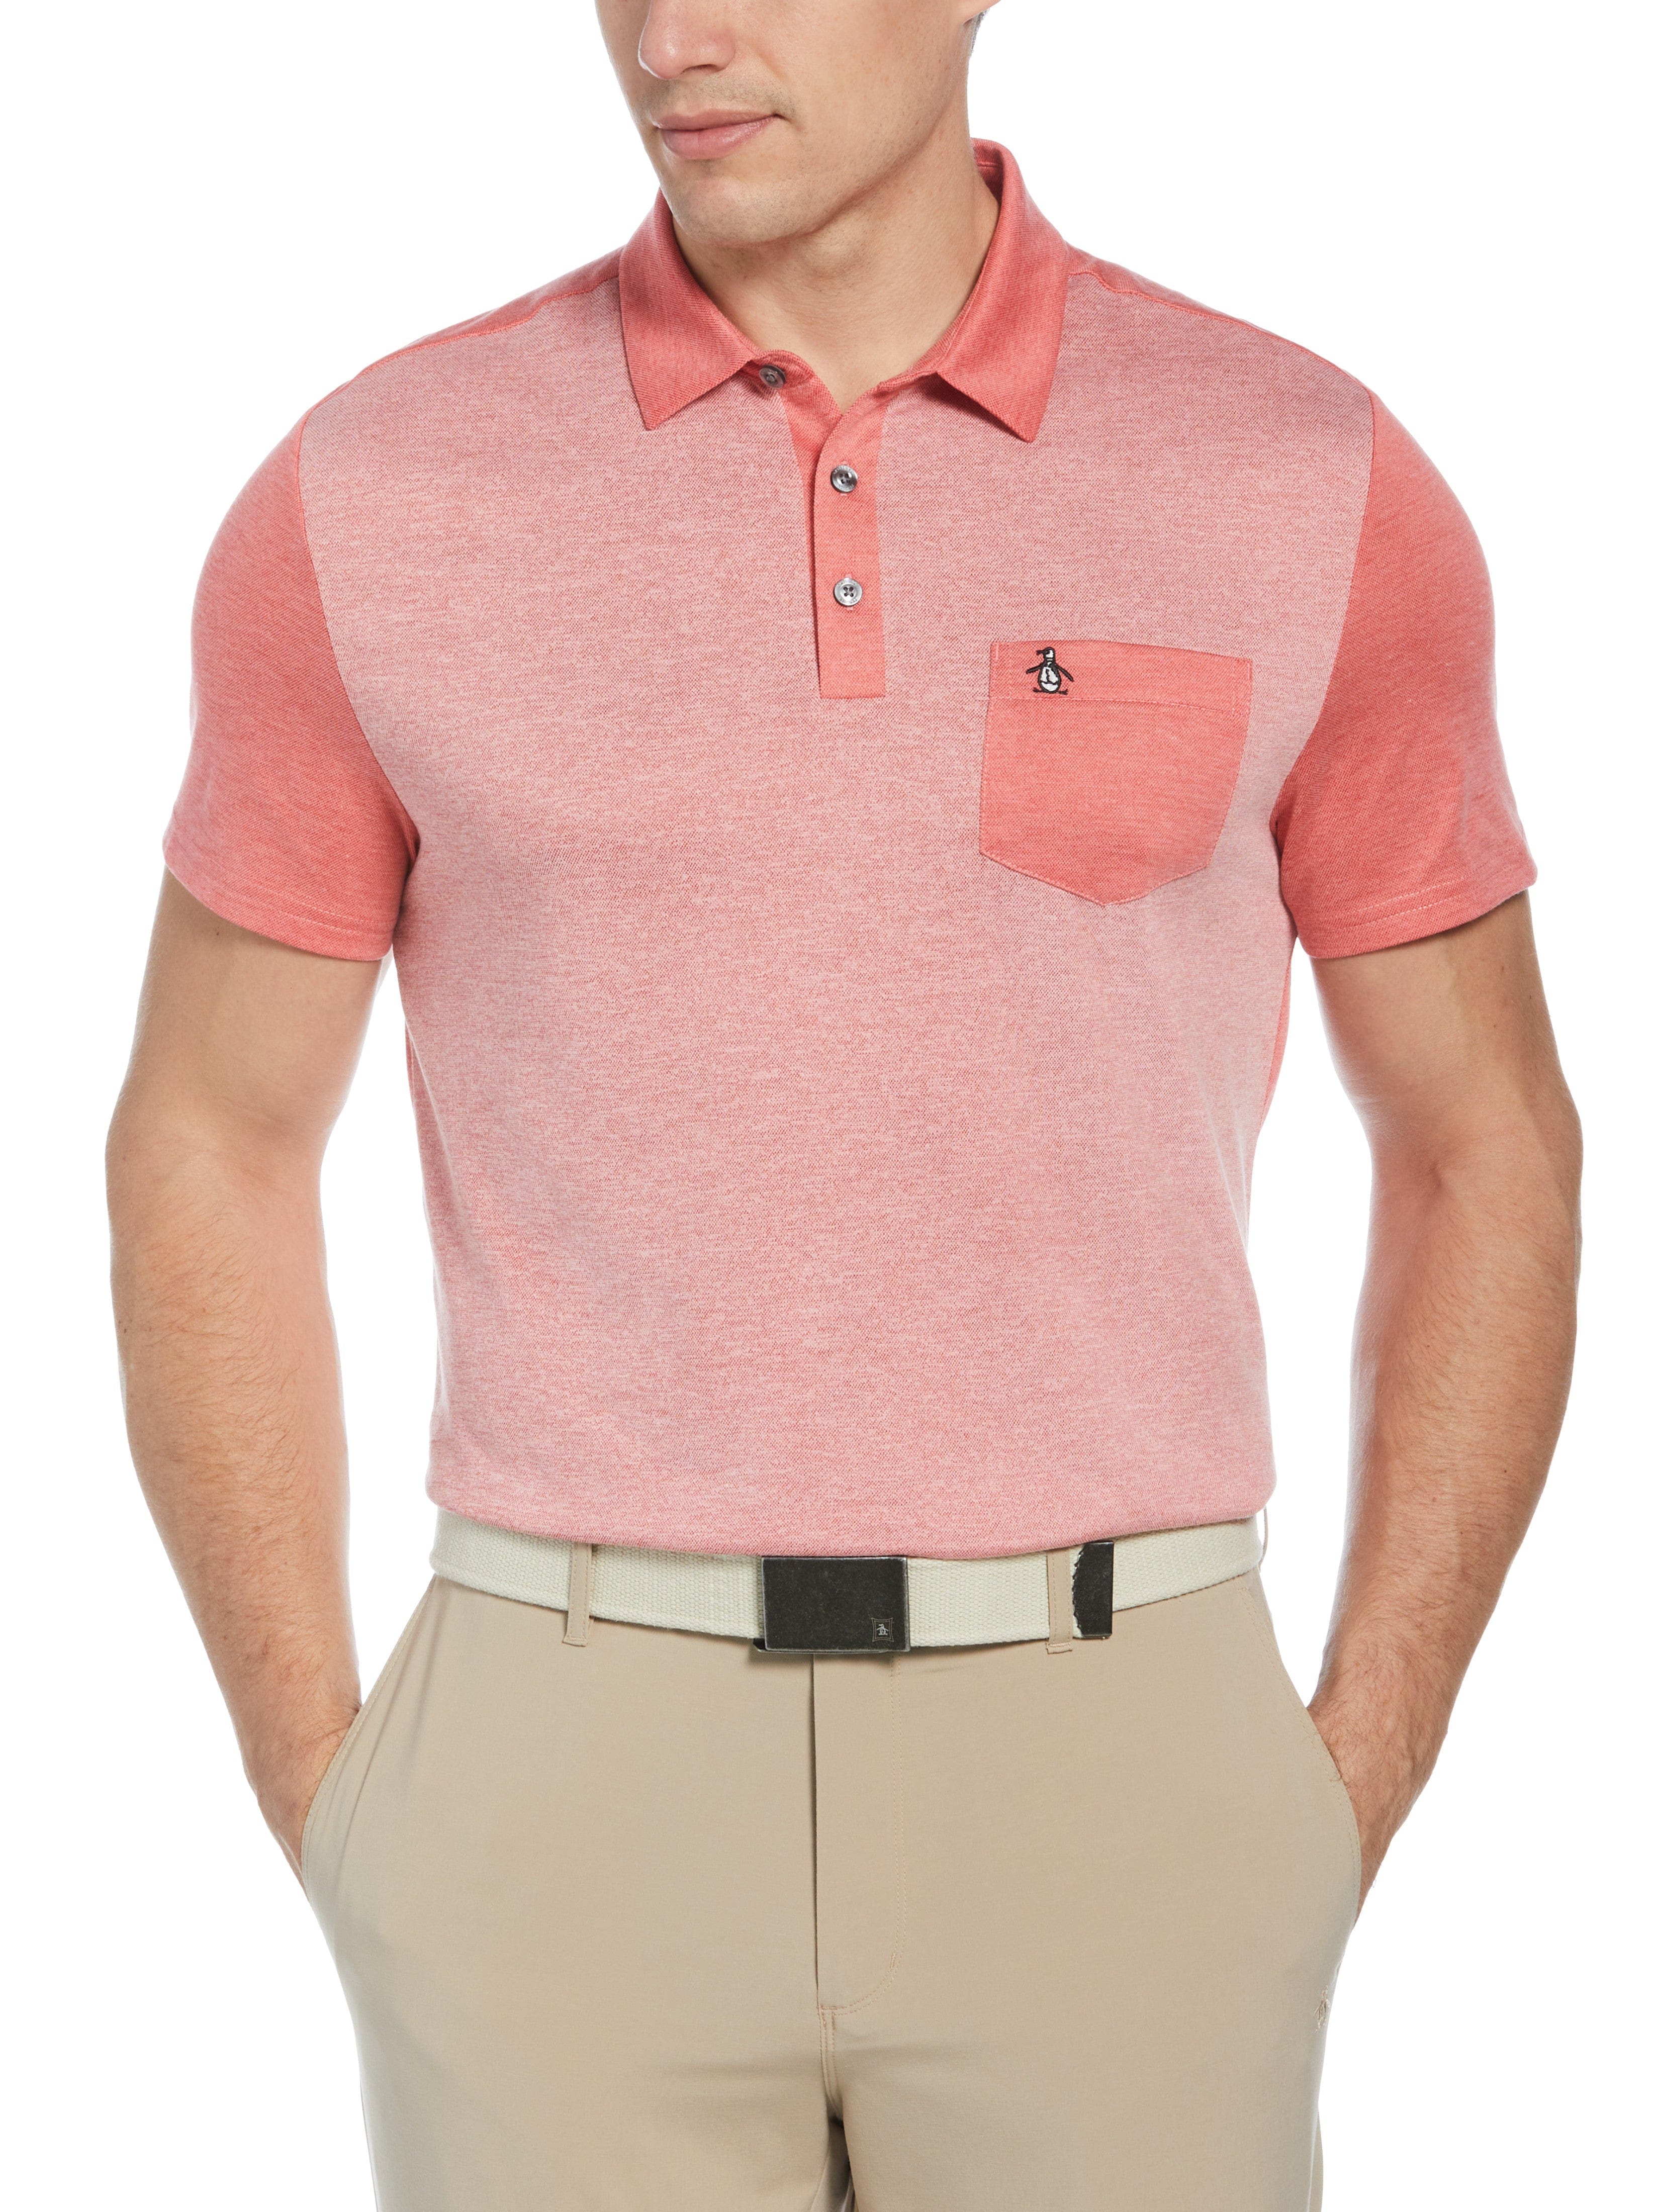 Original Penguin Mens Color Block Golf Polo Shirt, Size XL, Bittersweet Red, Polyester/Recycled Polyester/Cotton | Golf Apparel Shop